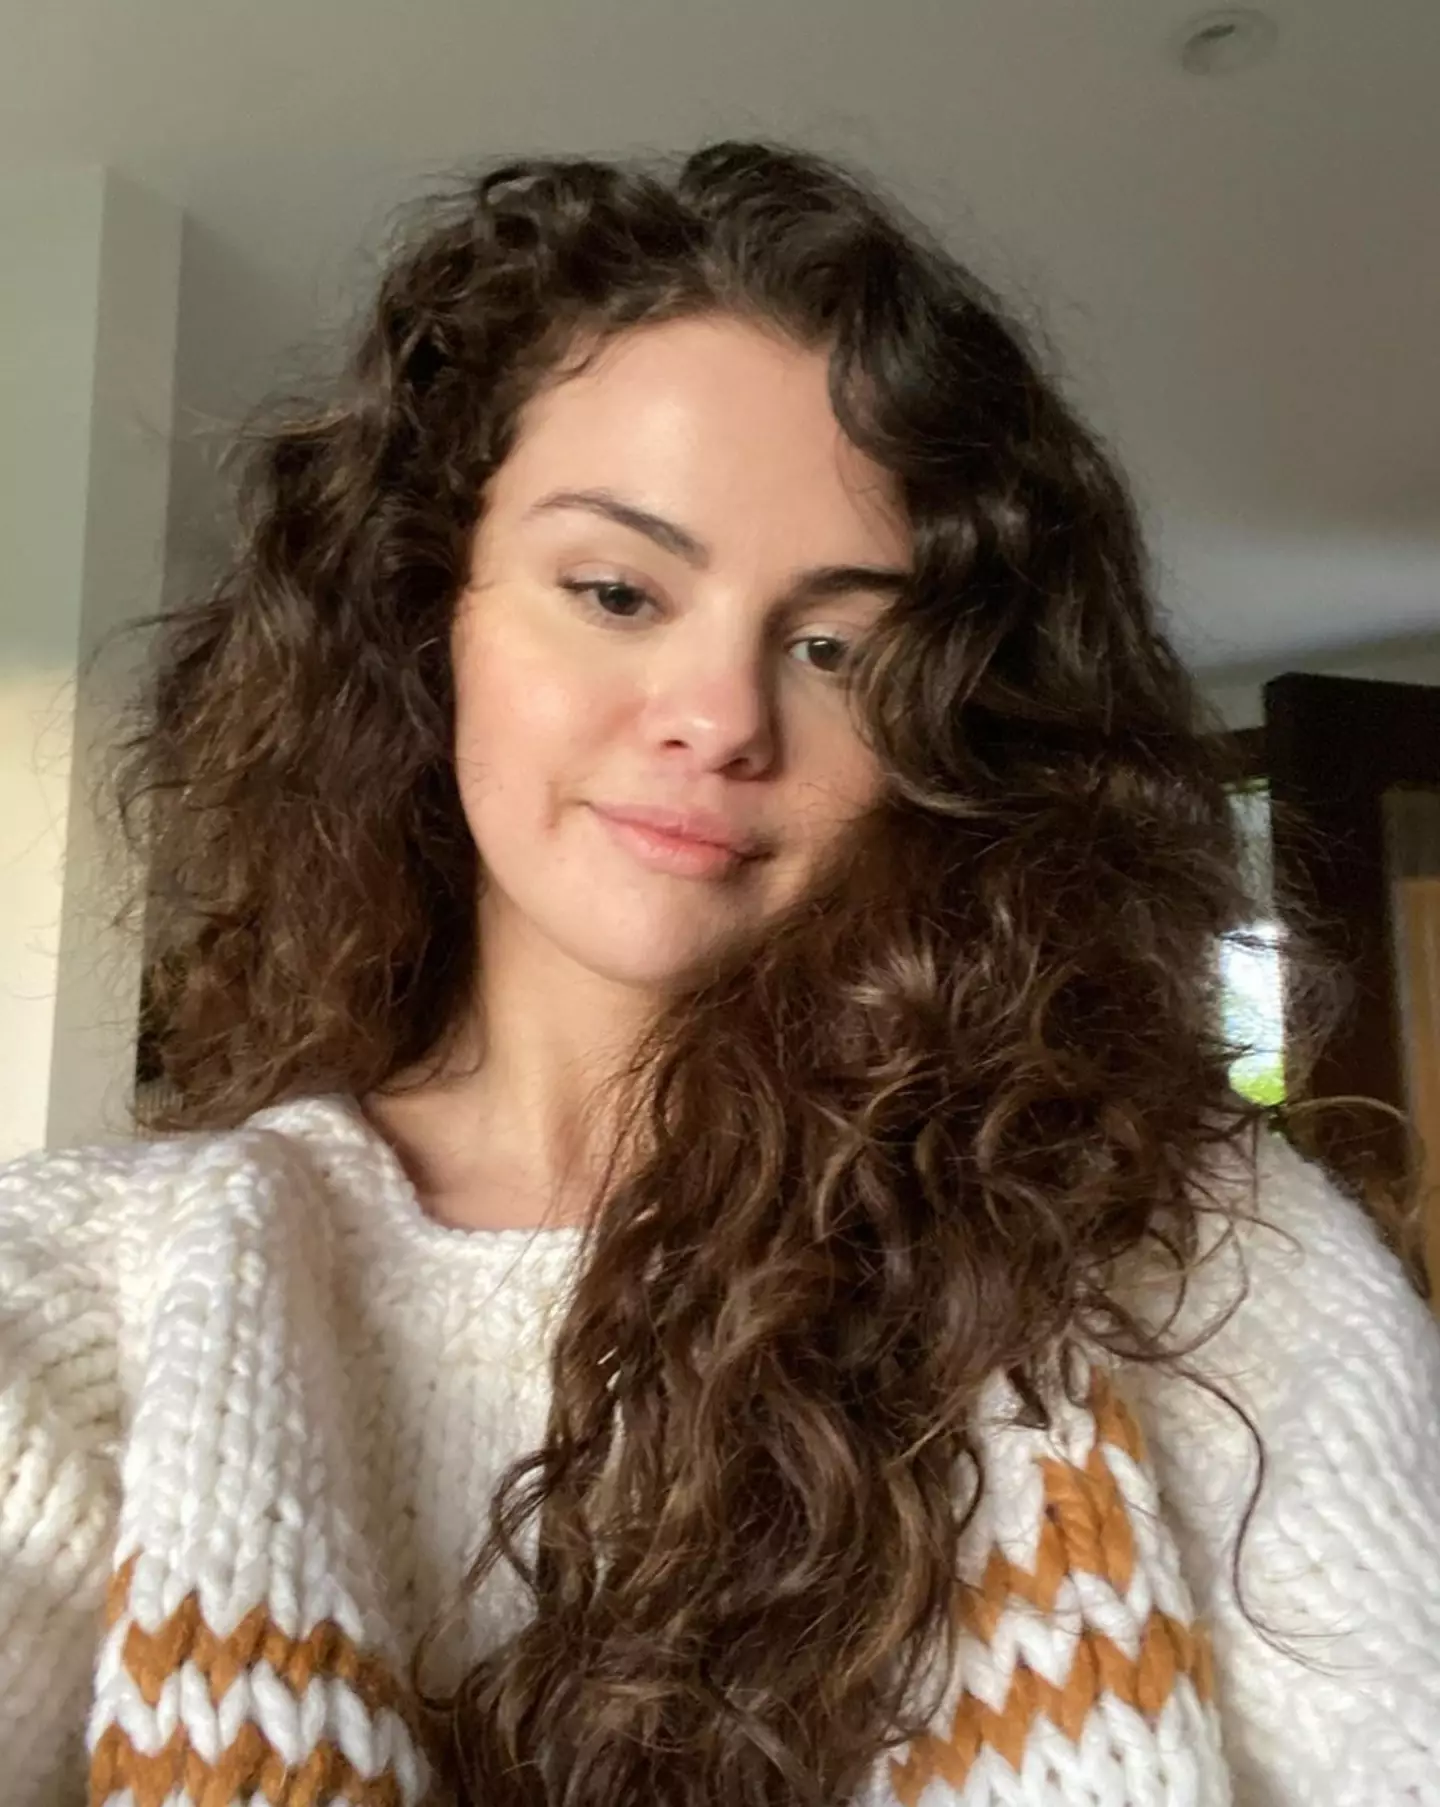 Selena Gomez is now the most followed woman on Instagram... again.